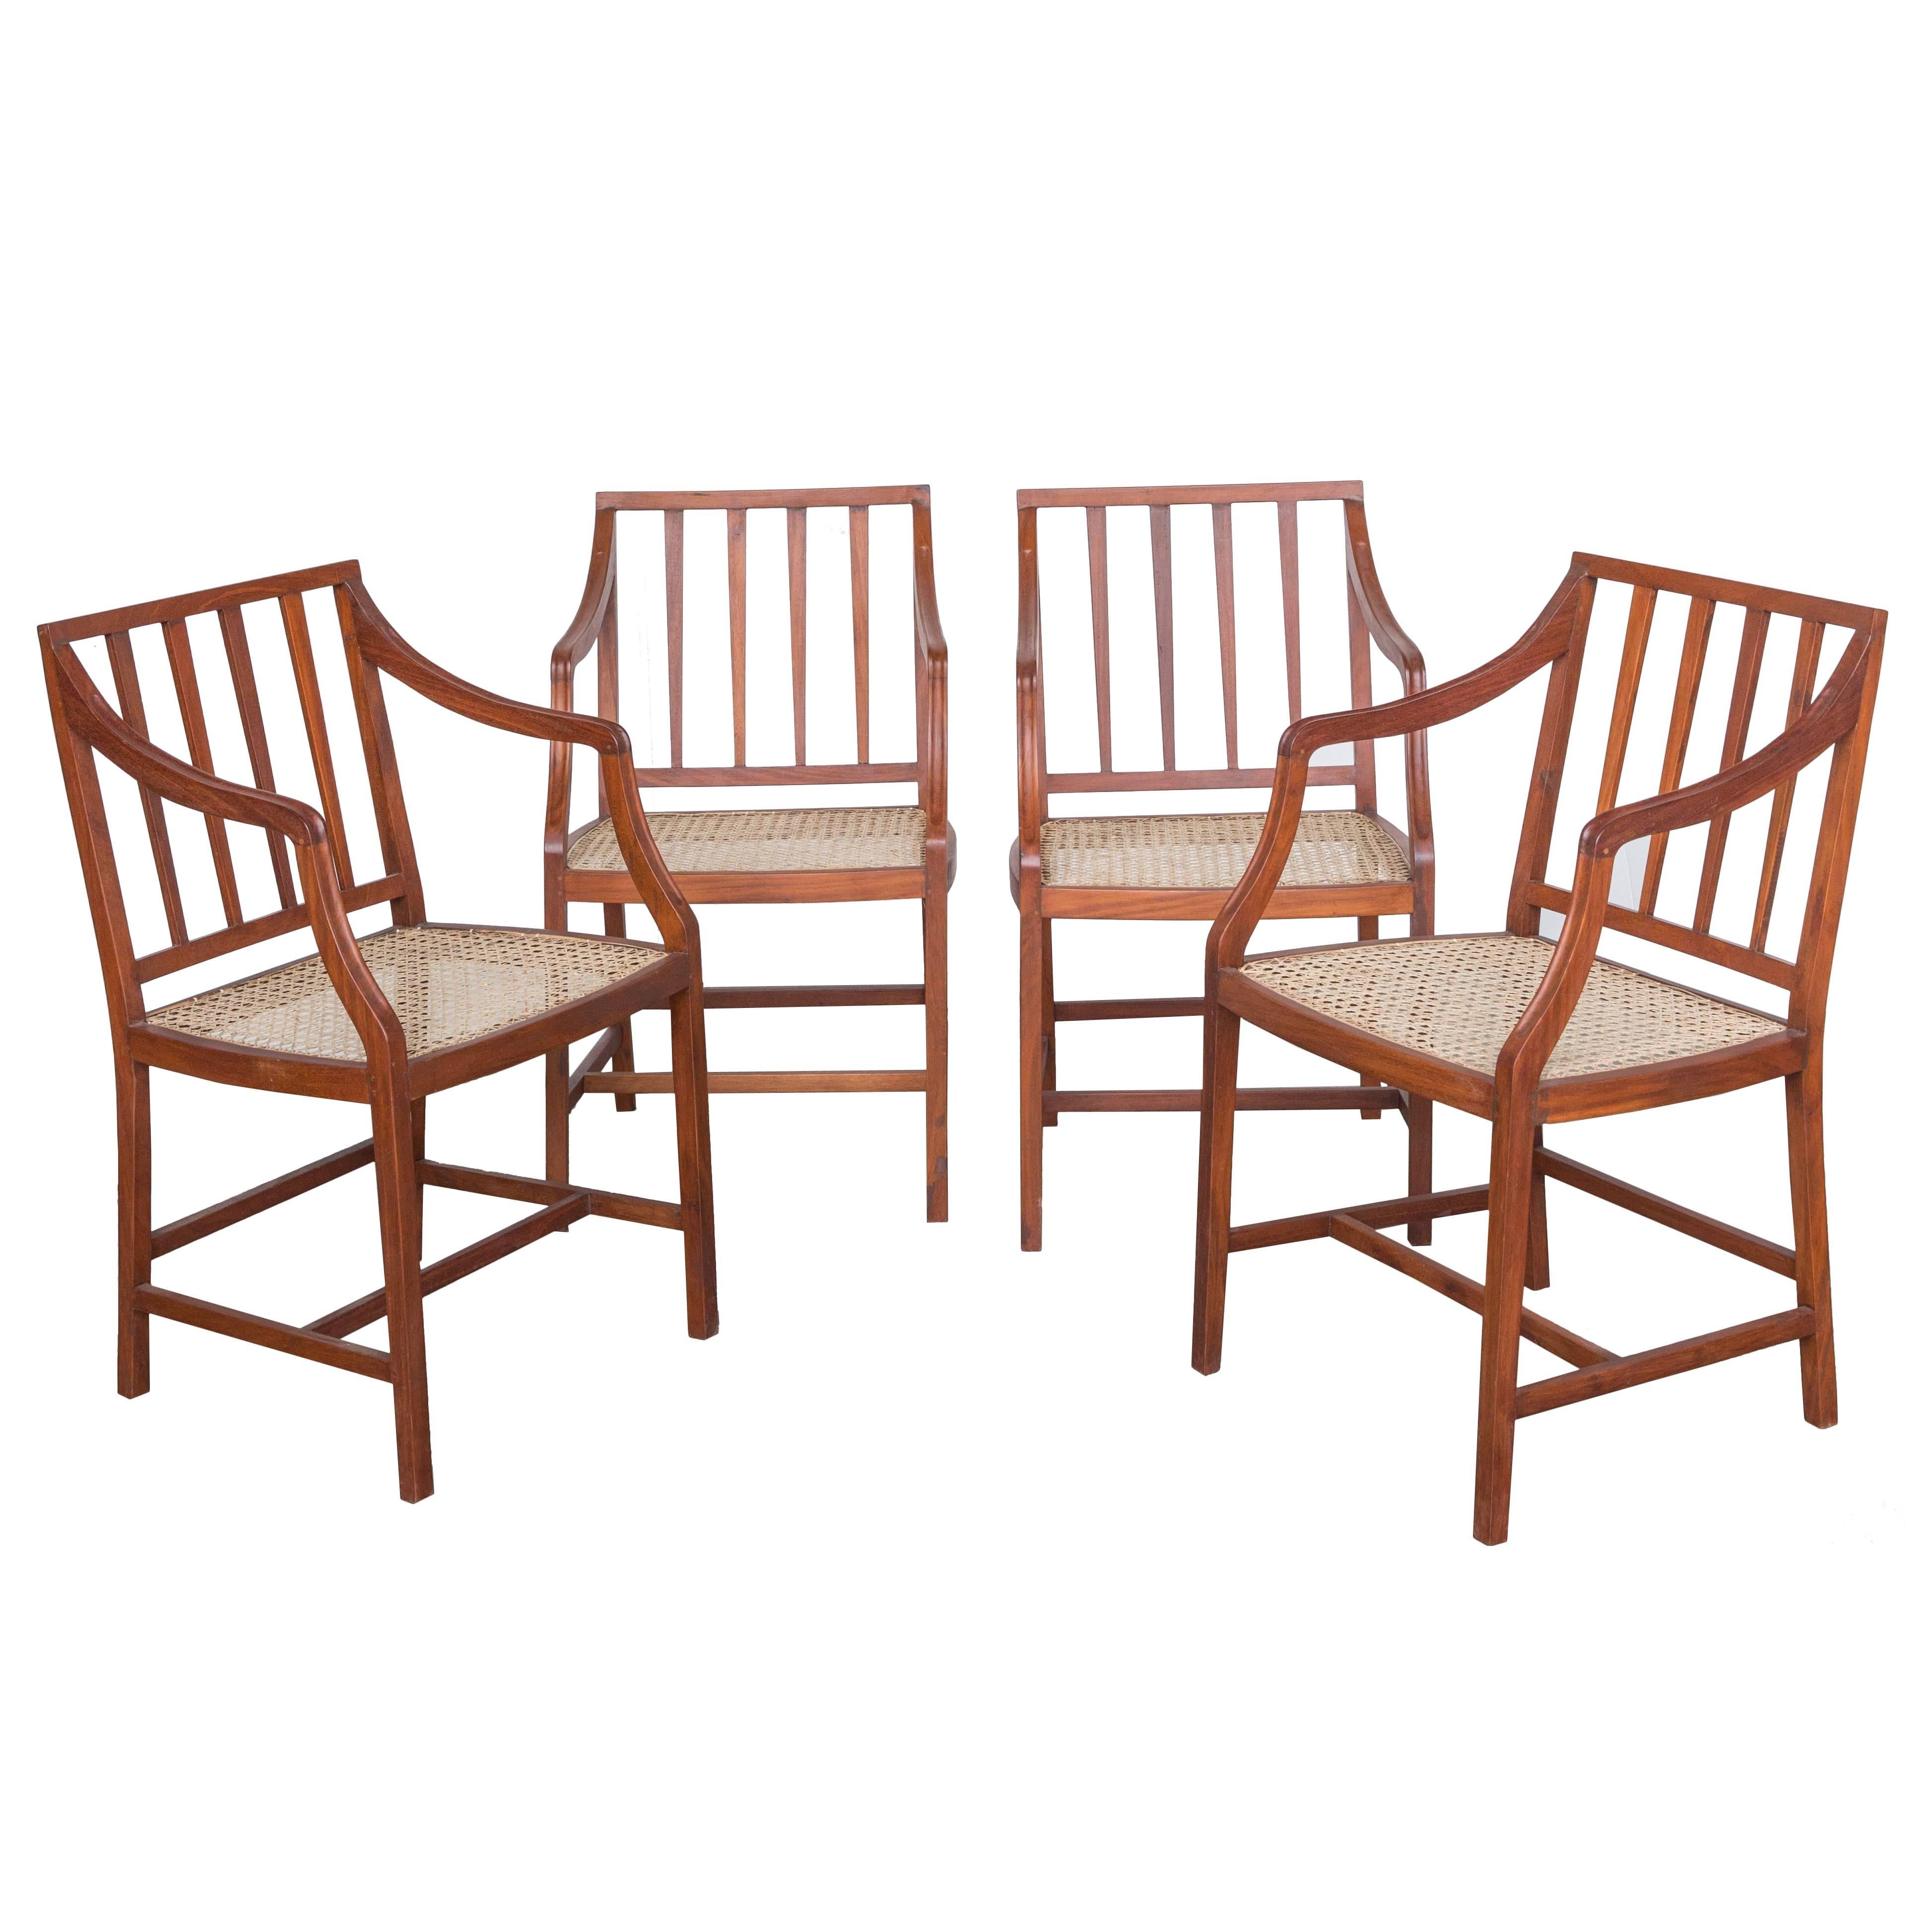 Set of Four Stylish Caned Chairs in Rare Nadun Wood For Sale